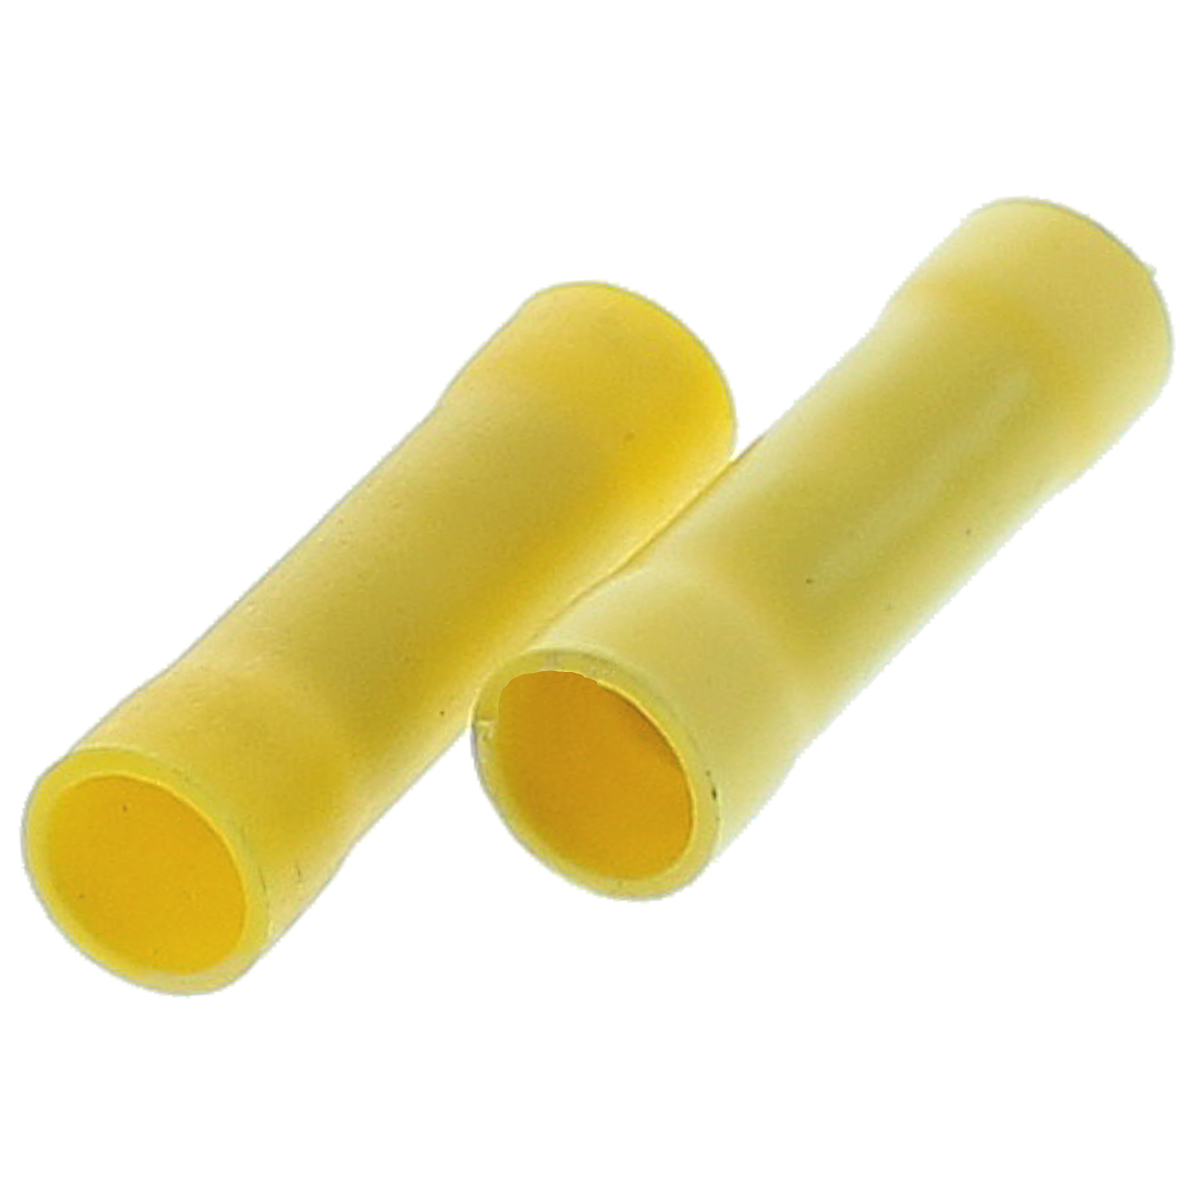 12-10 AWG Yellow Vinyl Flared Insulated Butt Connectors, 250/PKG